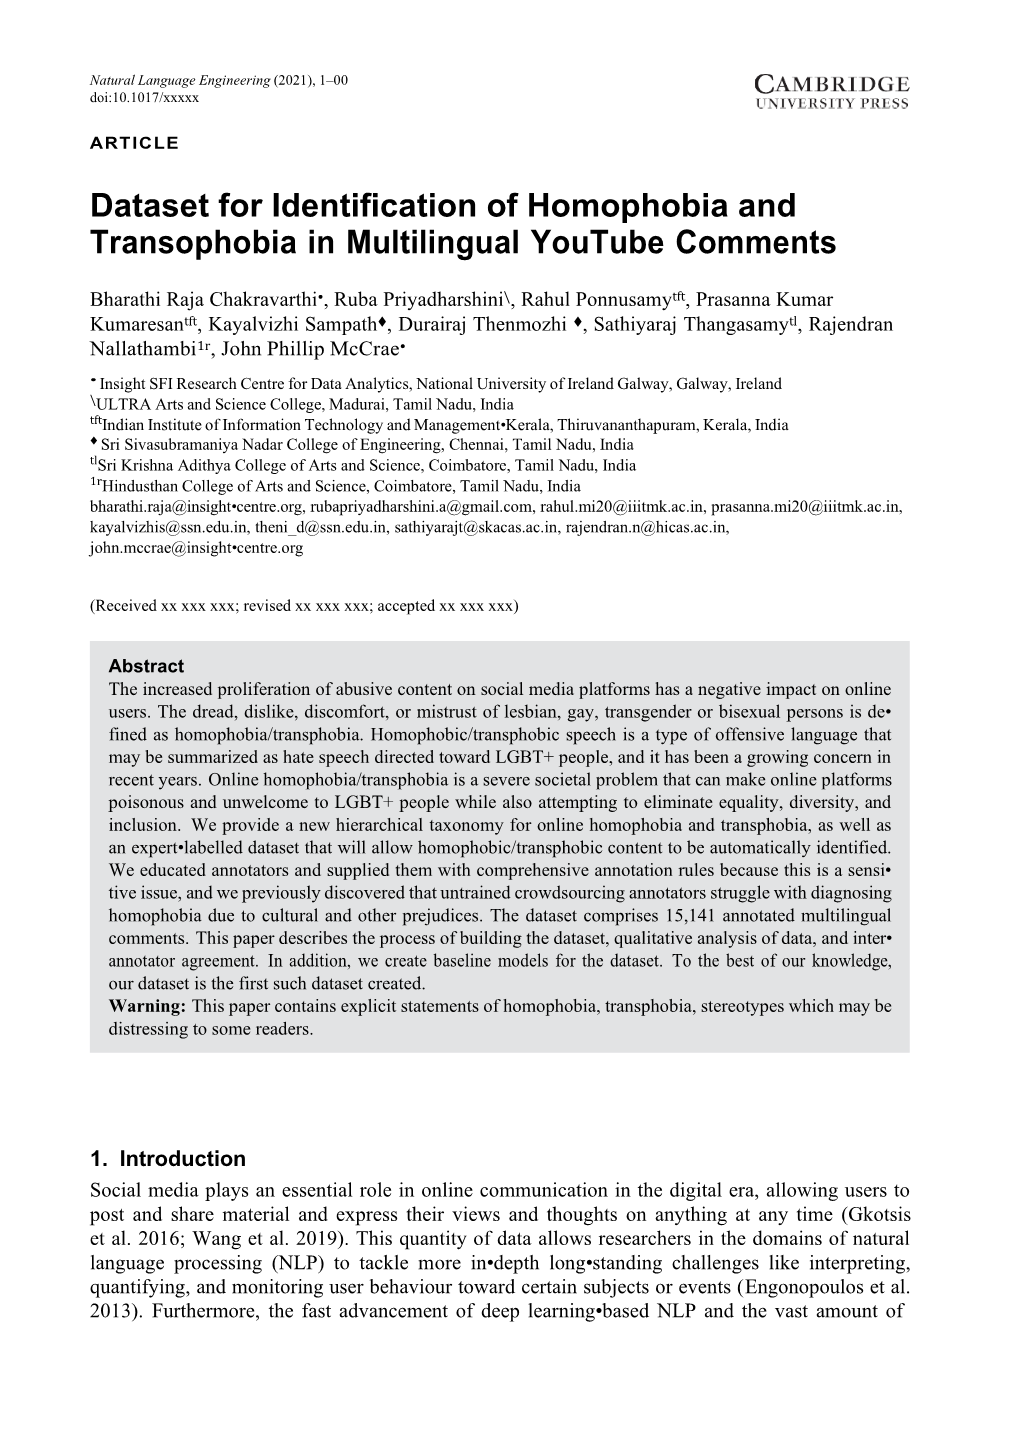 Dataset for Identification of Homophobia and Transophobia in Multilingual Youtube Comments